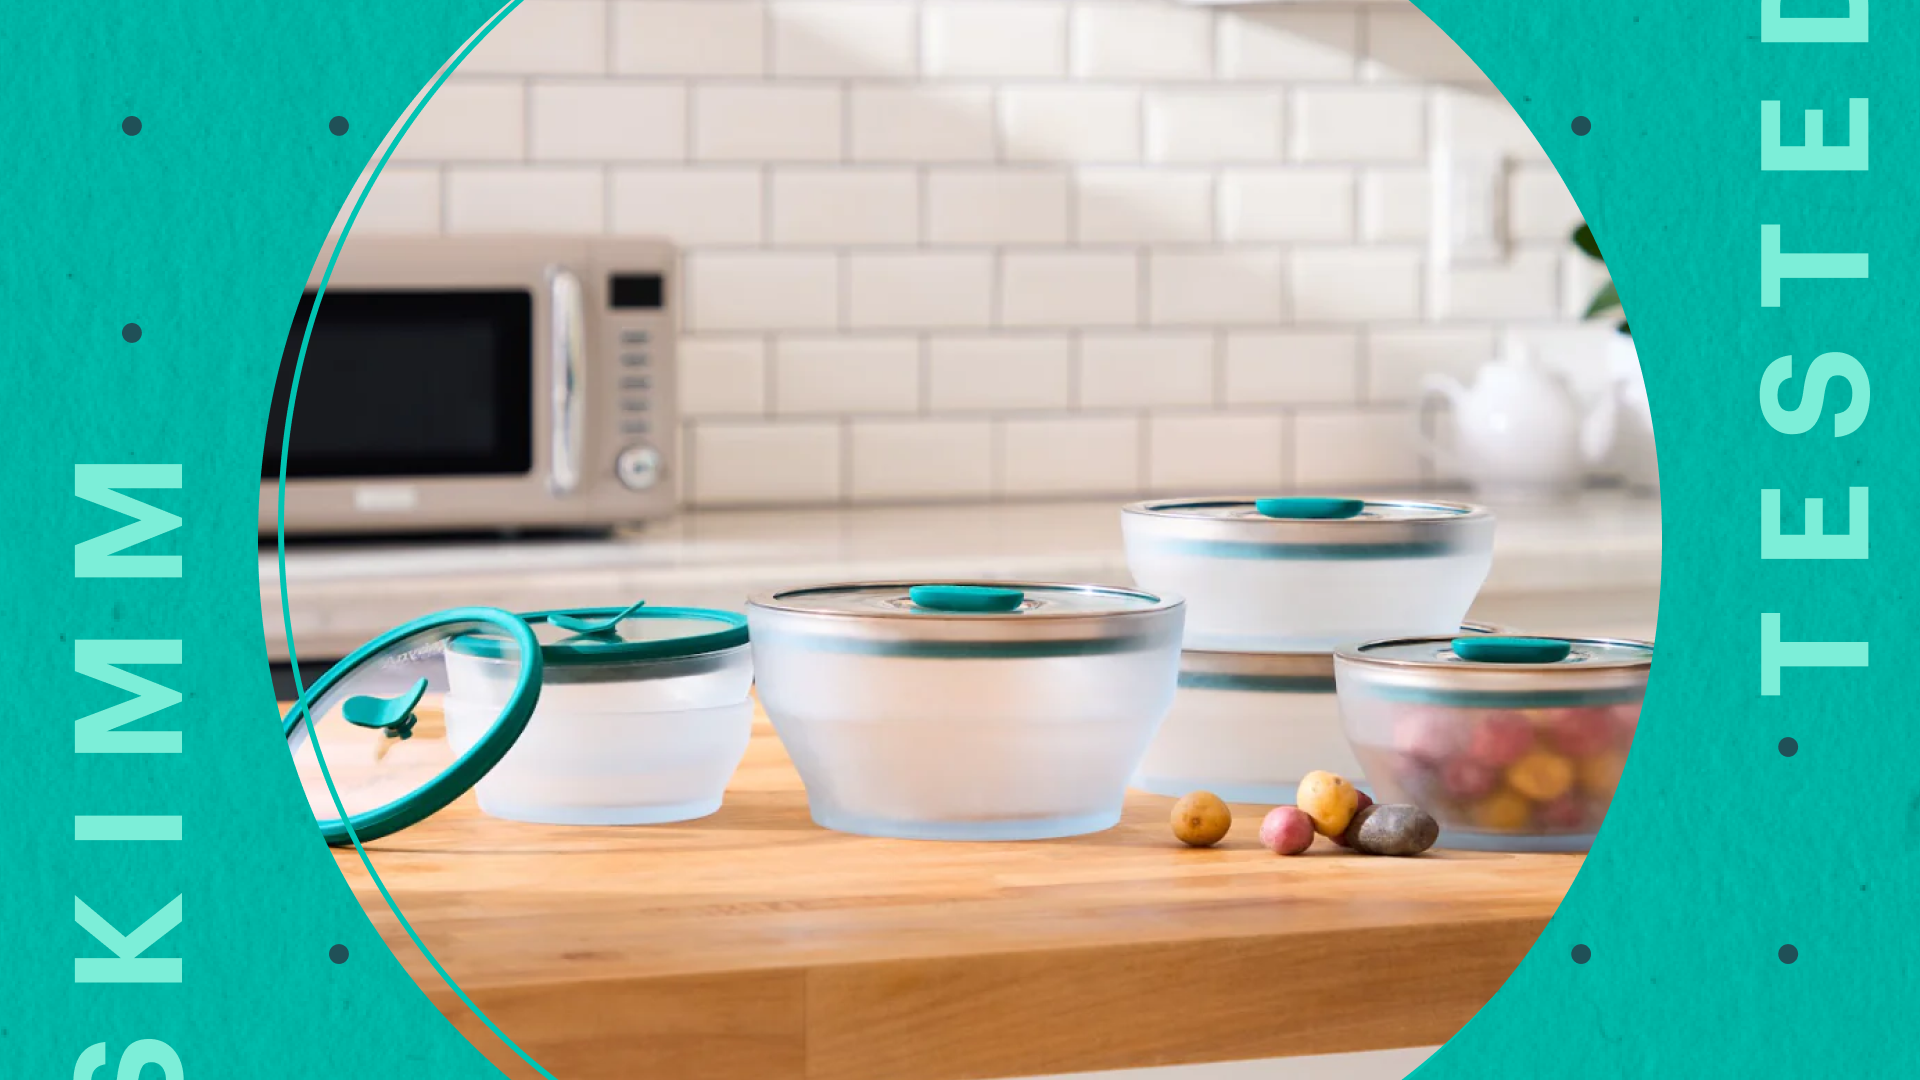 Anyday Microwave Cookware The Large Starter Set